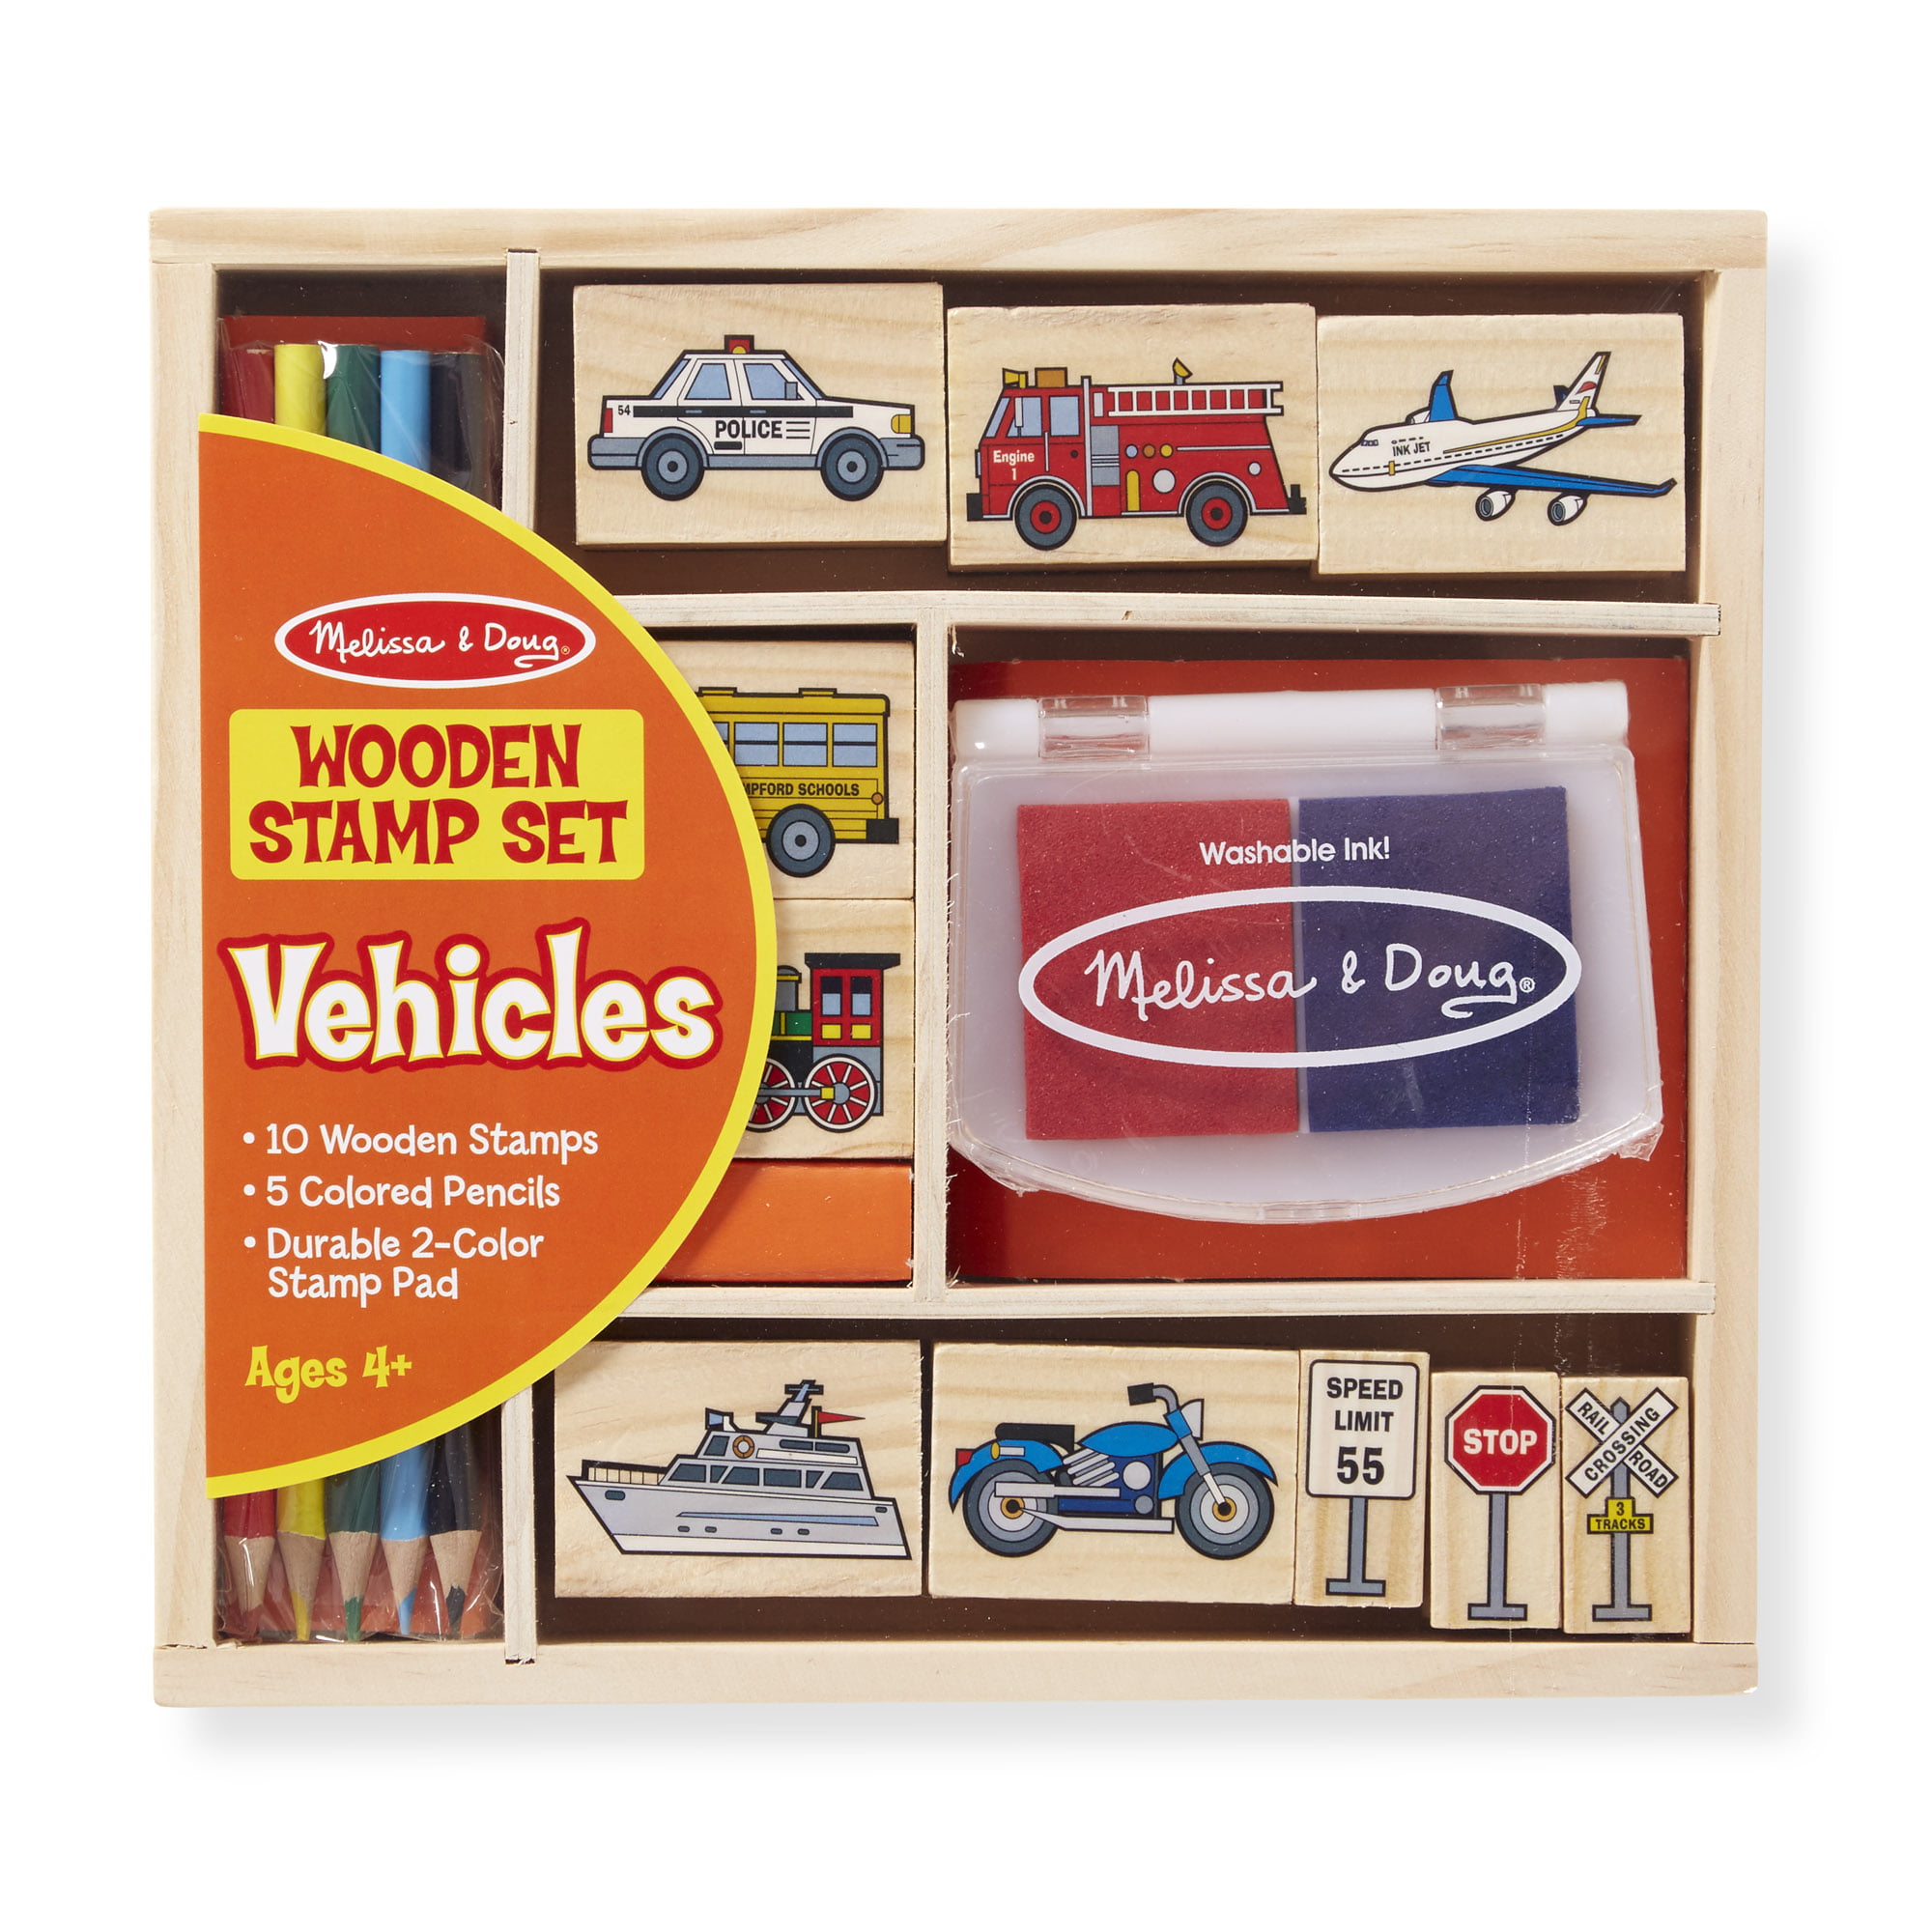 Awesome Melissa & Doug Wooden Vehicle Stamp Set 10 STAMPS 5 Colored Pencils Bx23 for sale online 